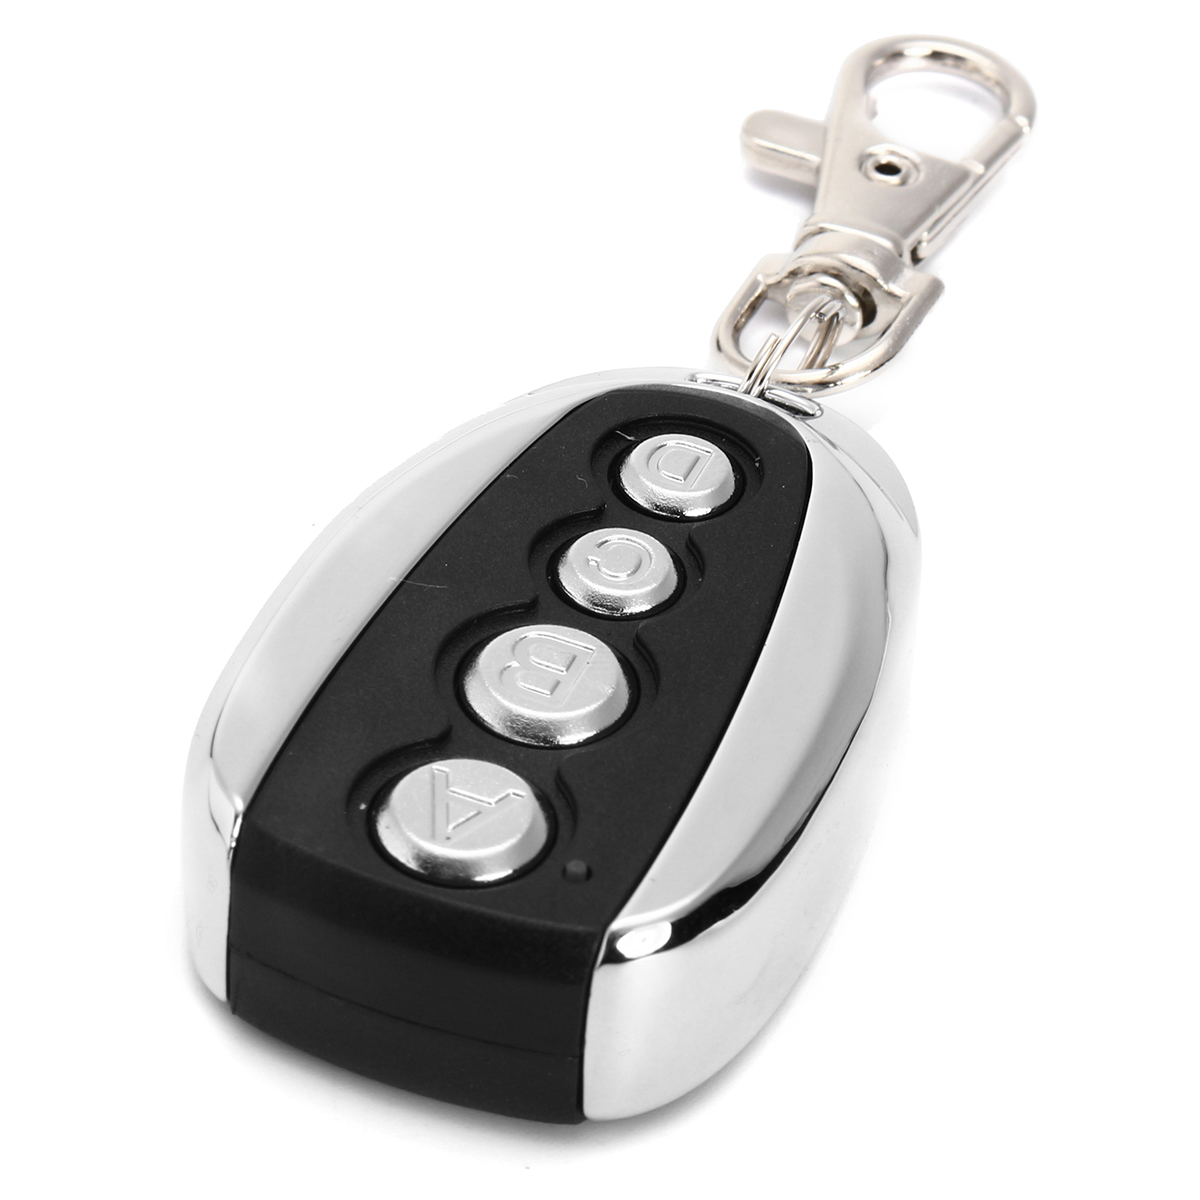 433MHZ-Remote-Control-Transmitter-Key-Chain-for-SL600AC-Slide-Gate-Operator-1268906